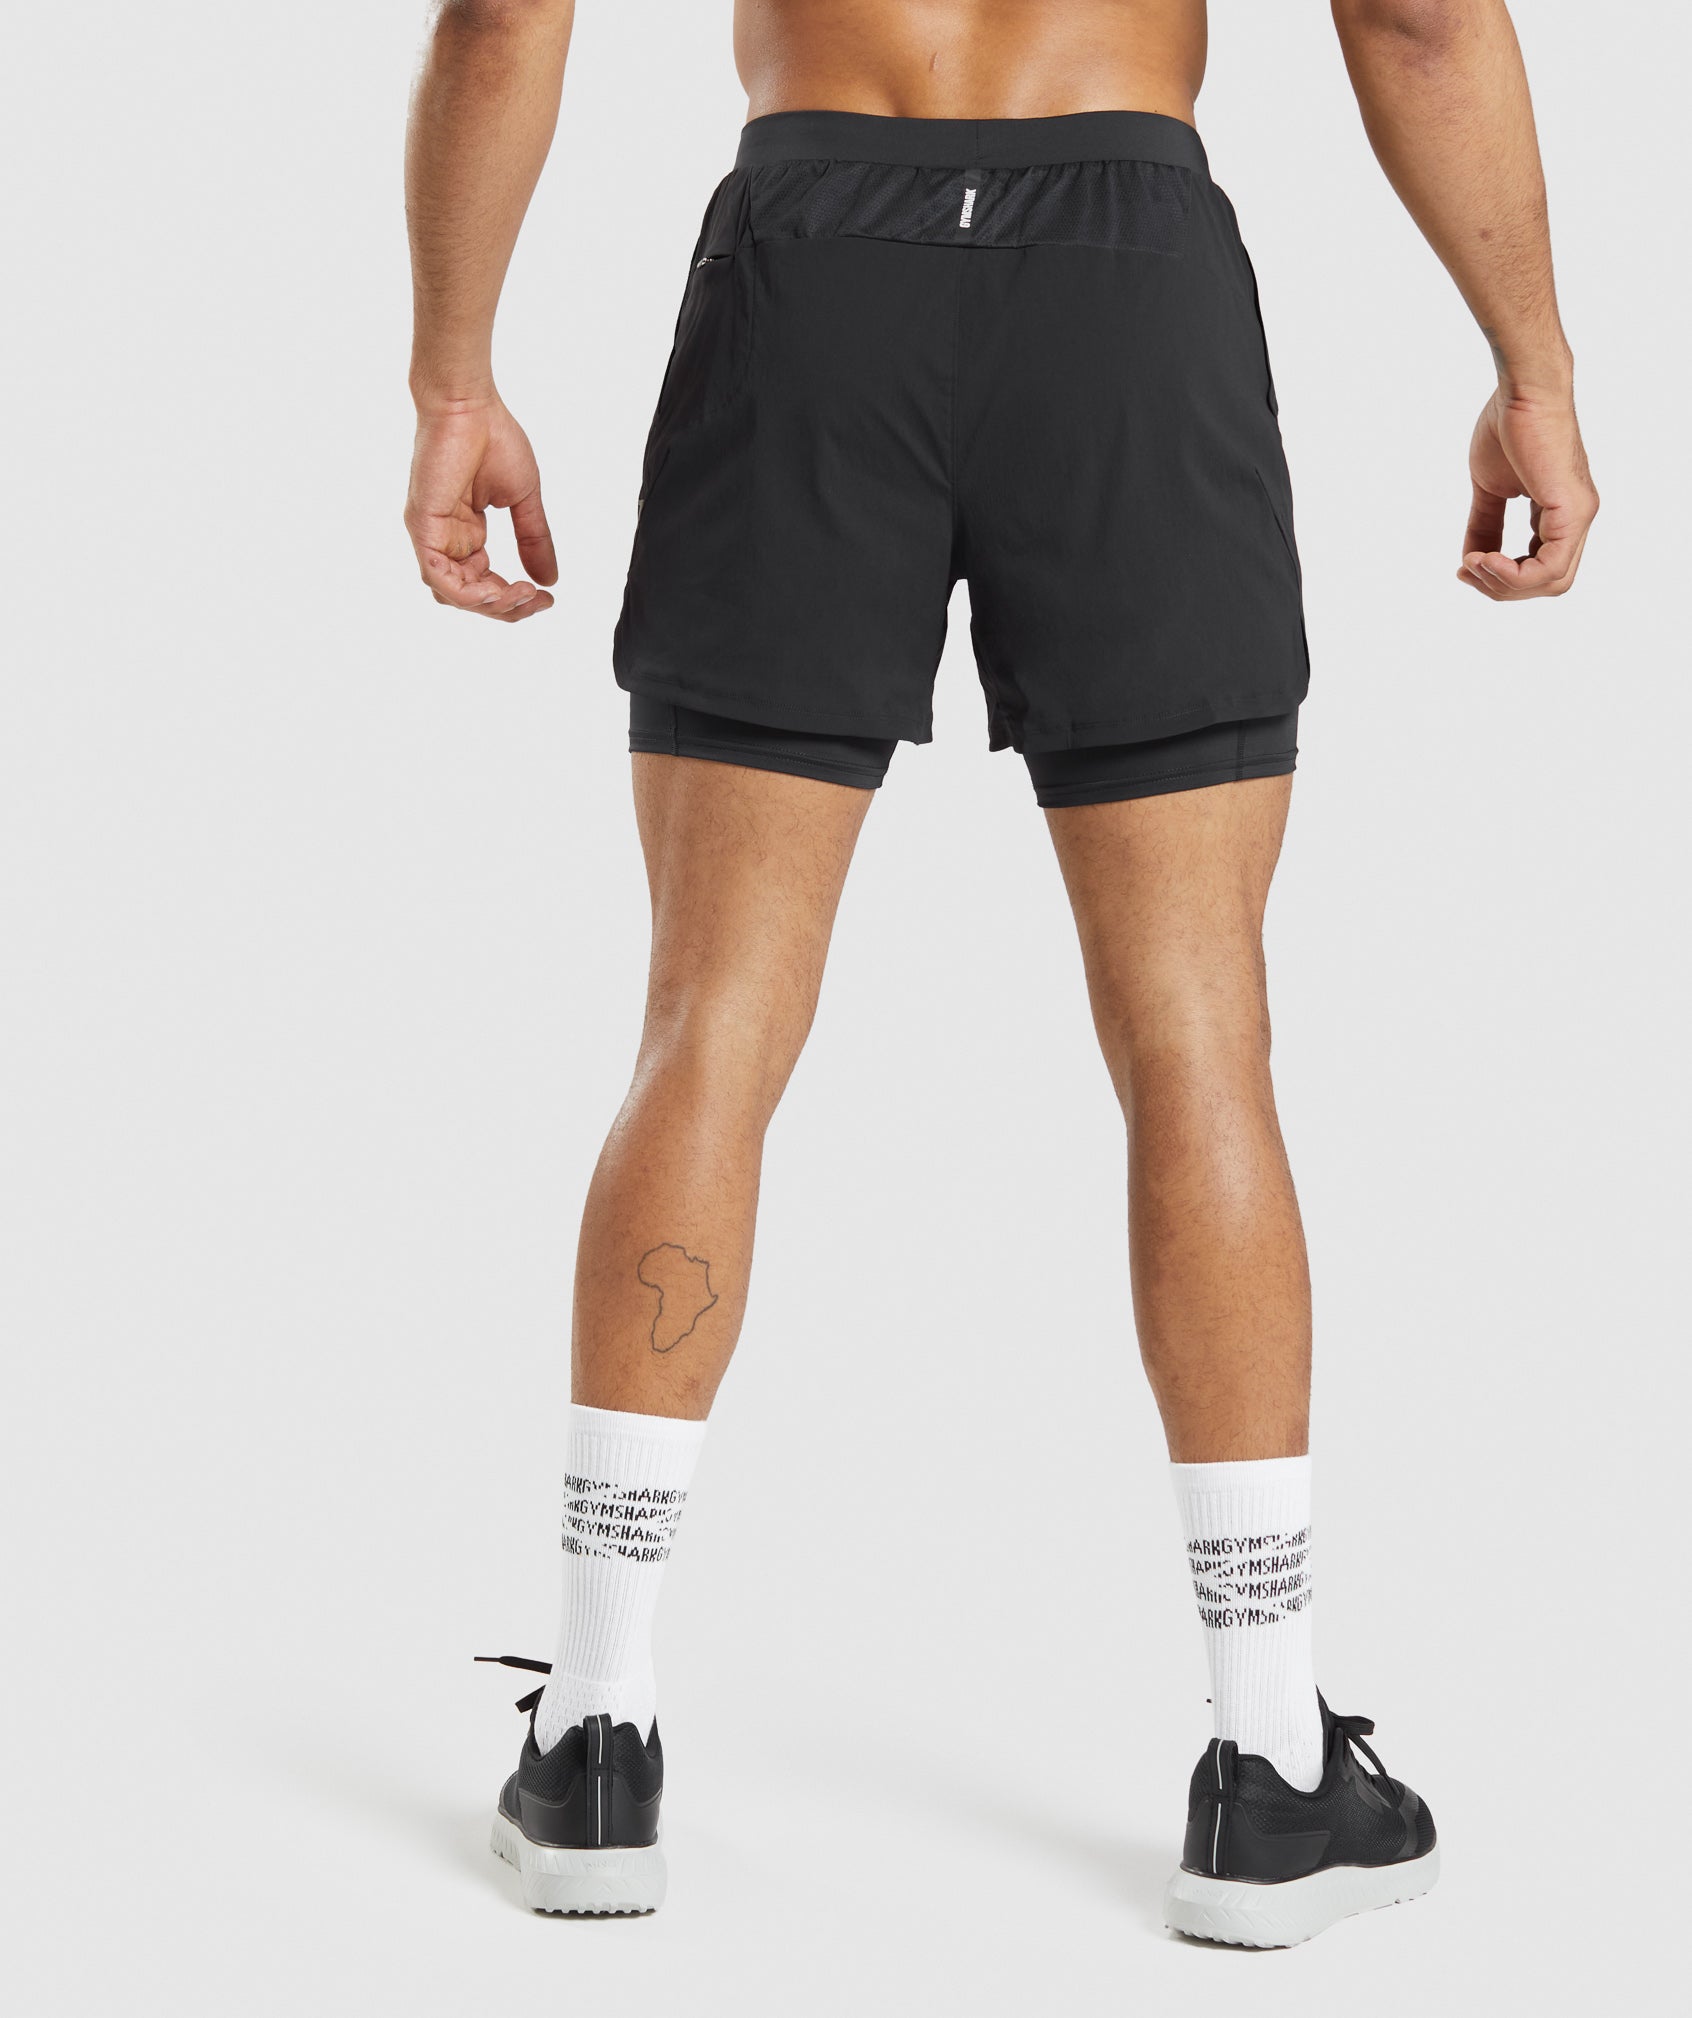 Speed Evolve 5" 2 In 1 Shorts in Black - view 2